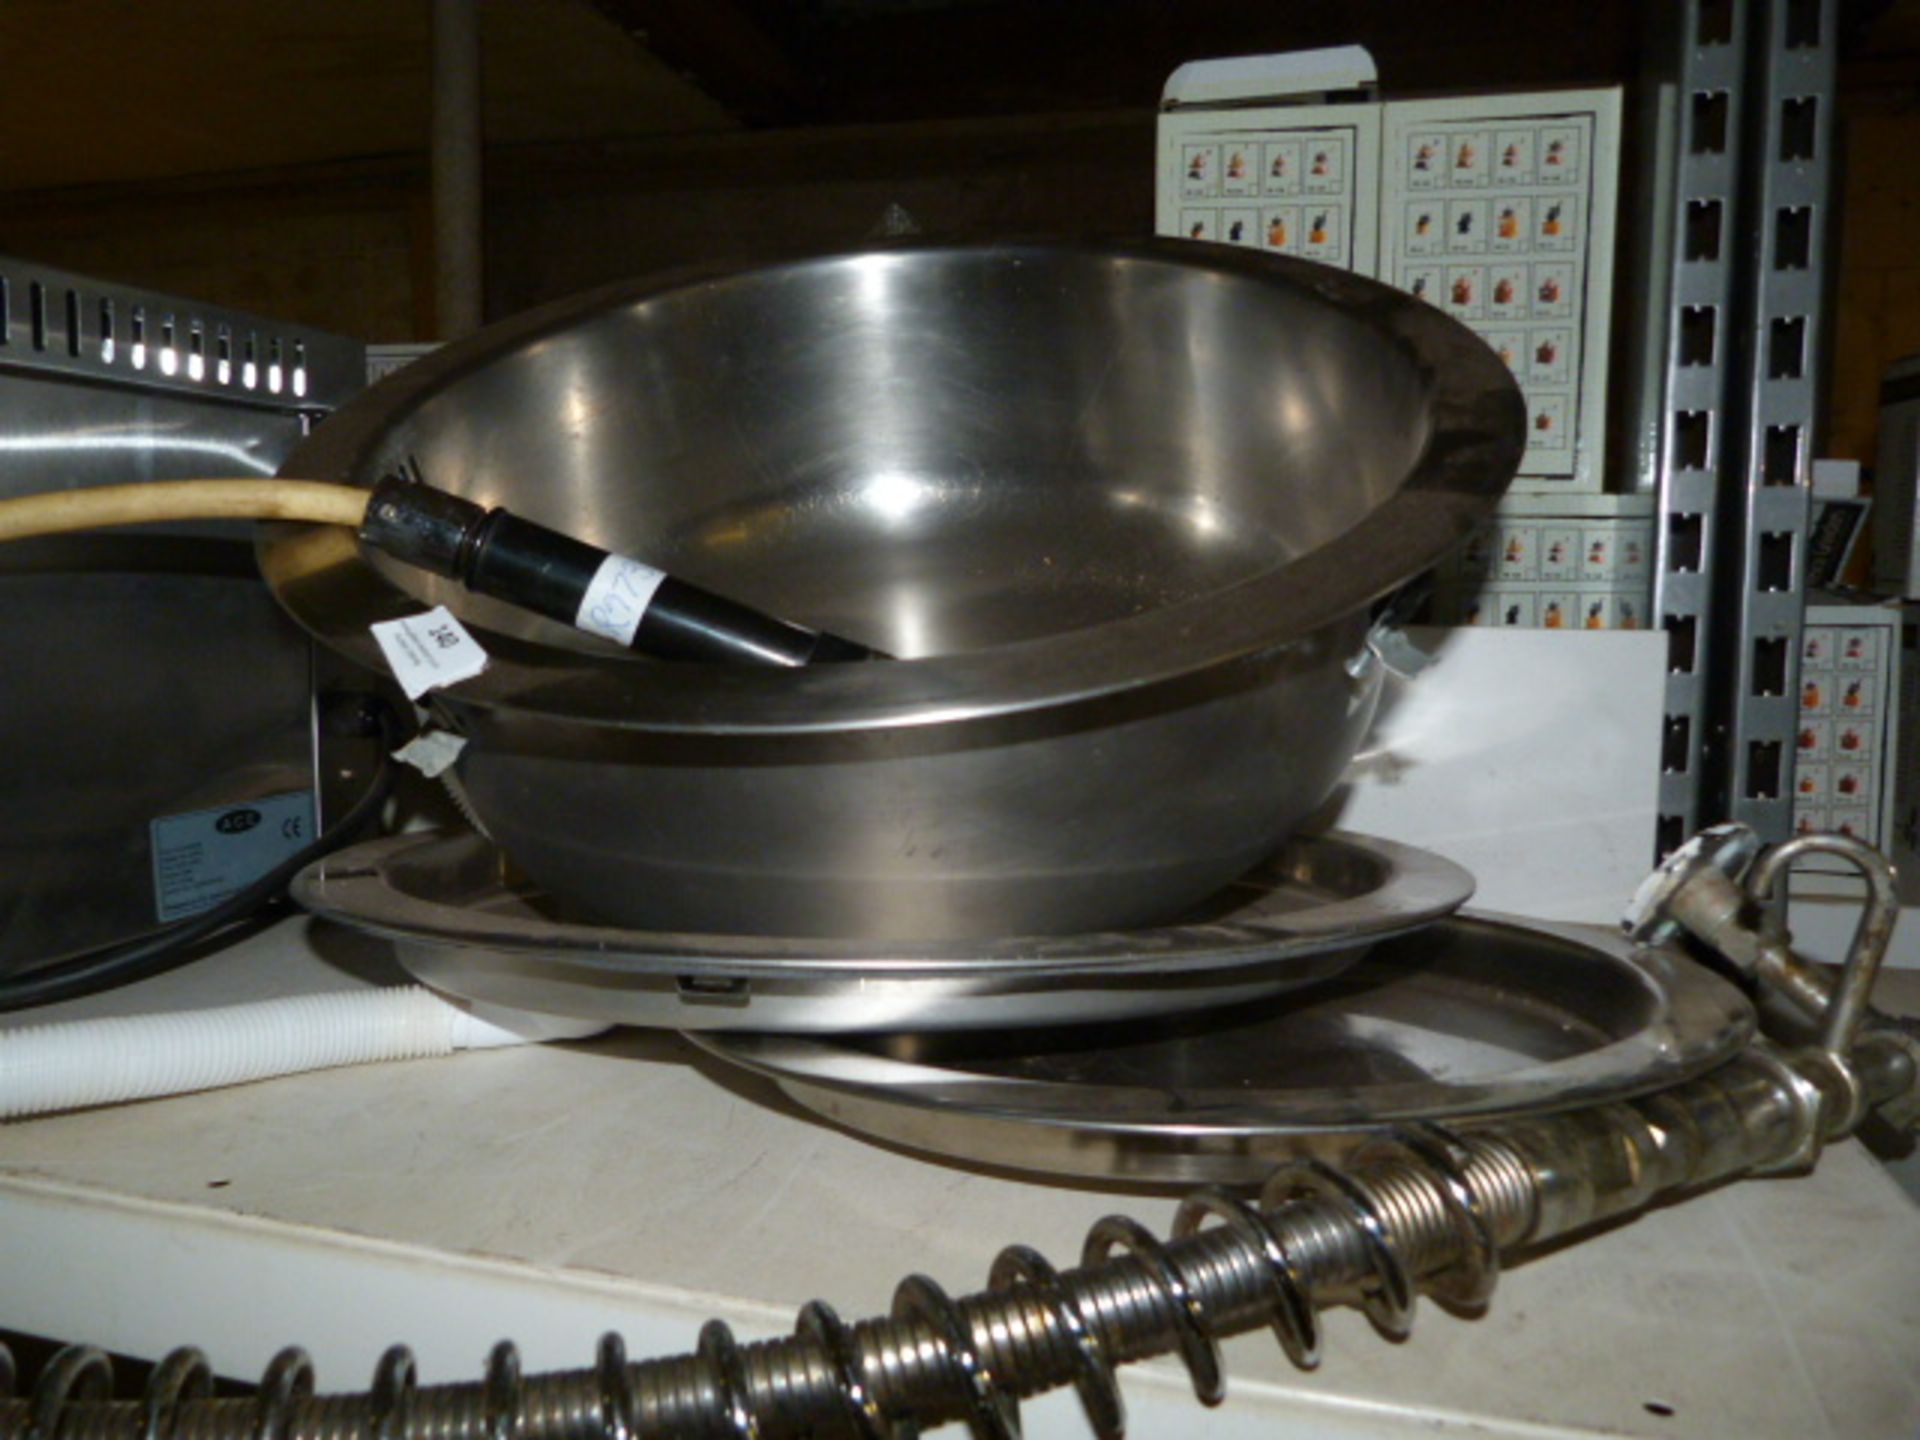 Stainless Steel Circular Sink with Drainer and Pan